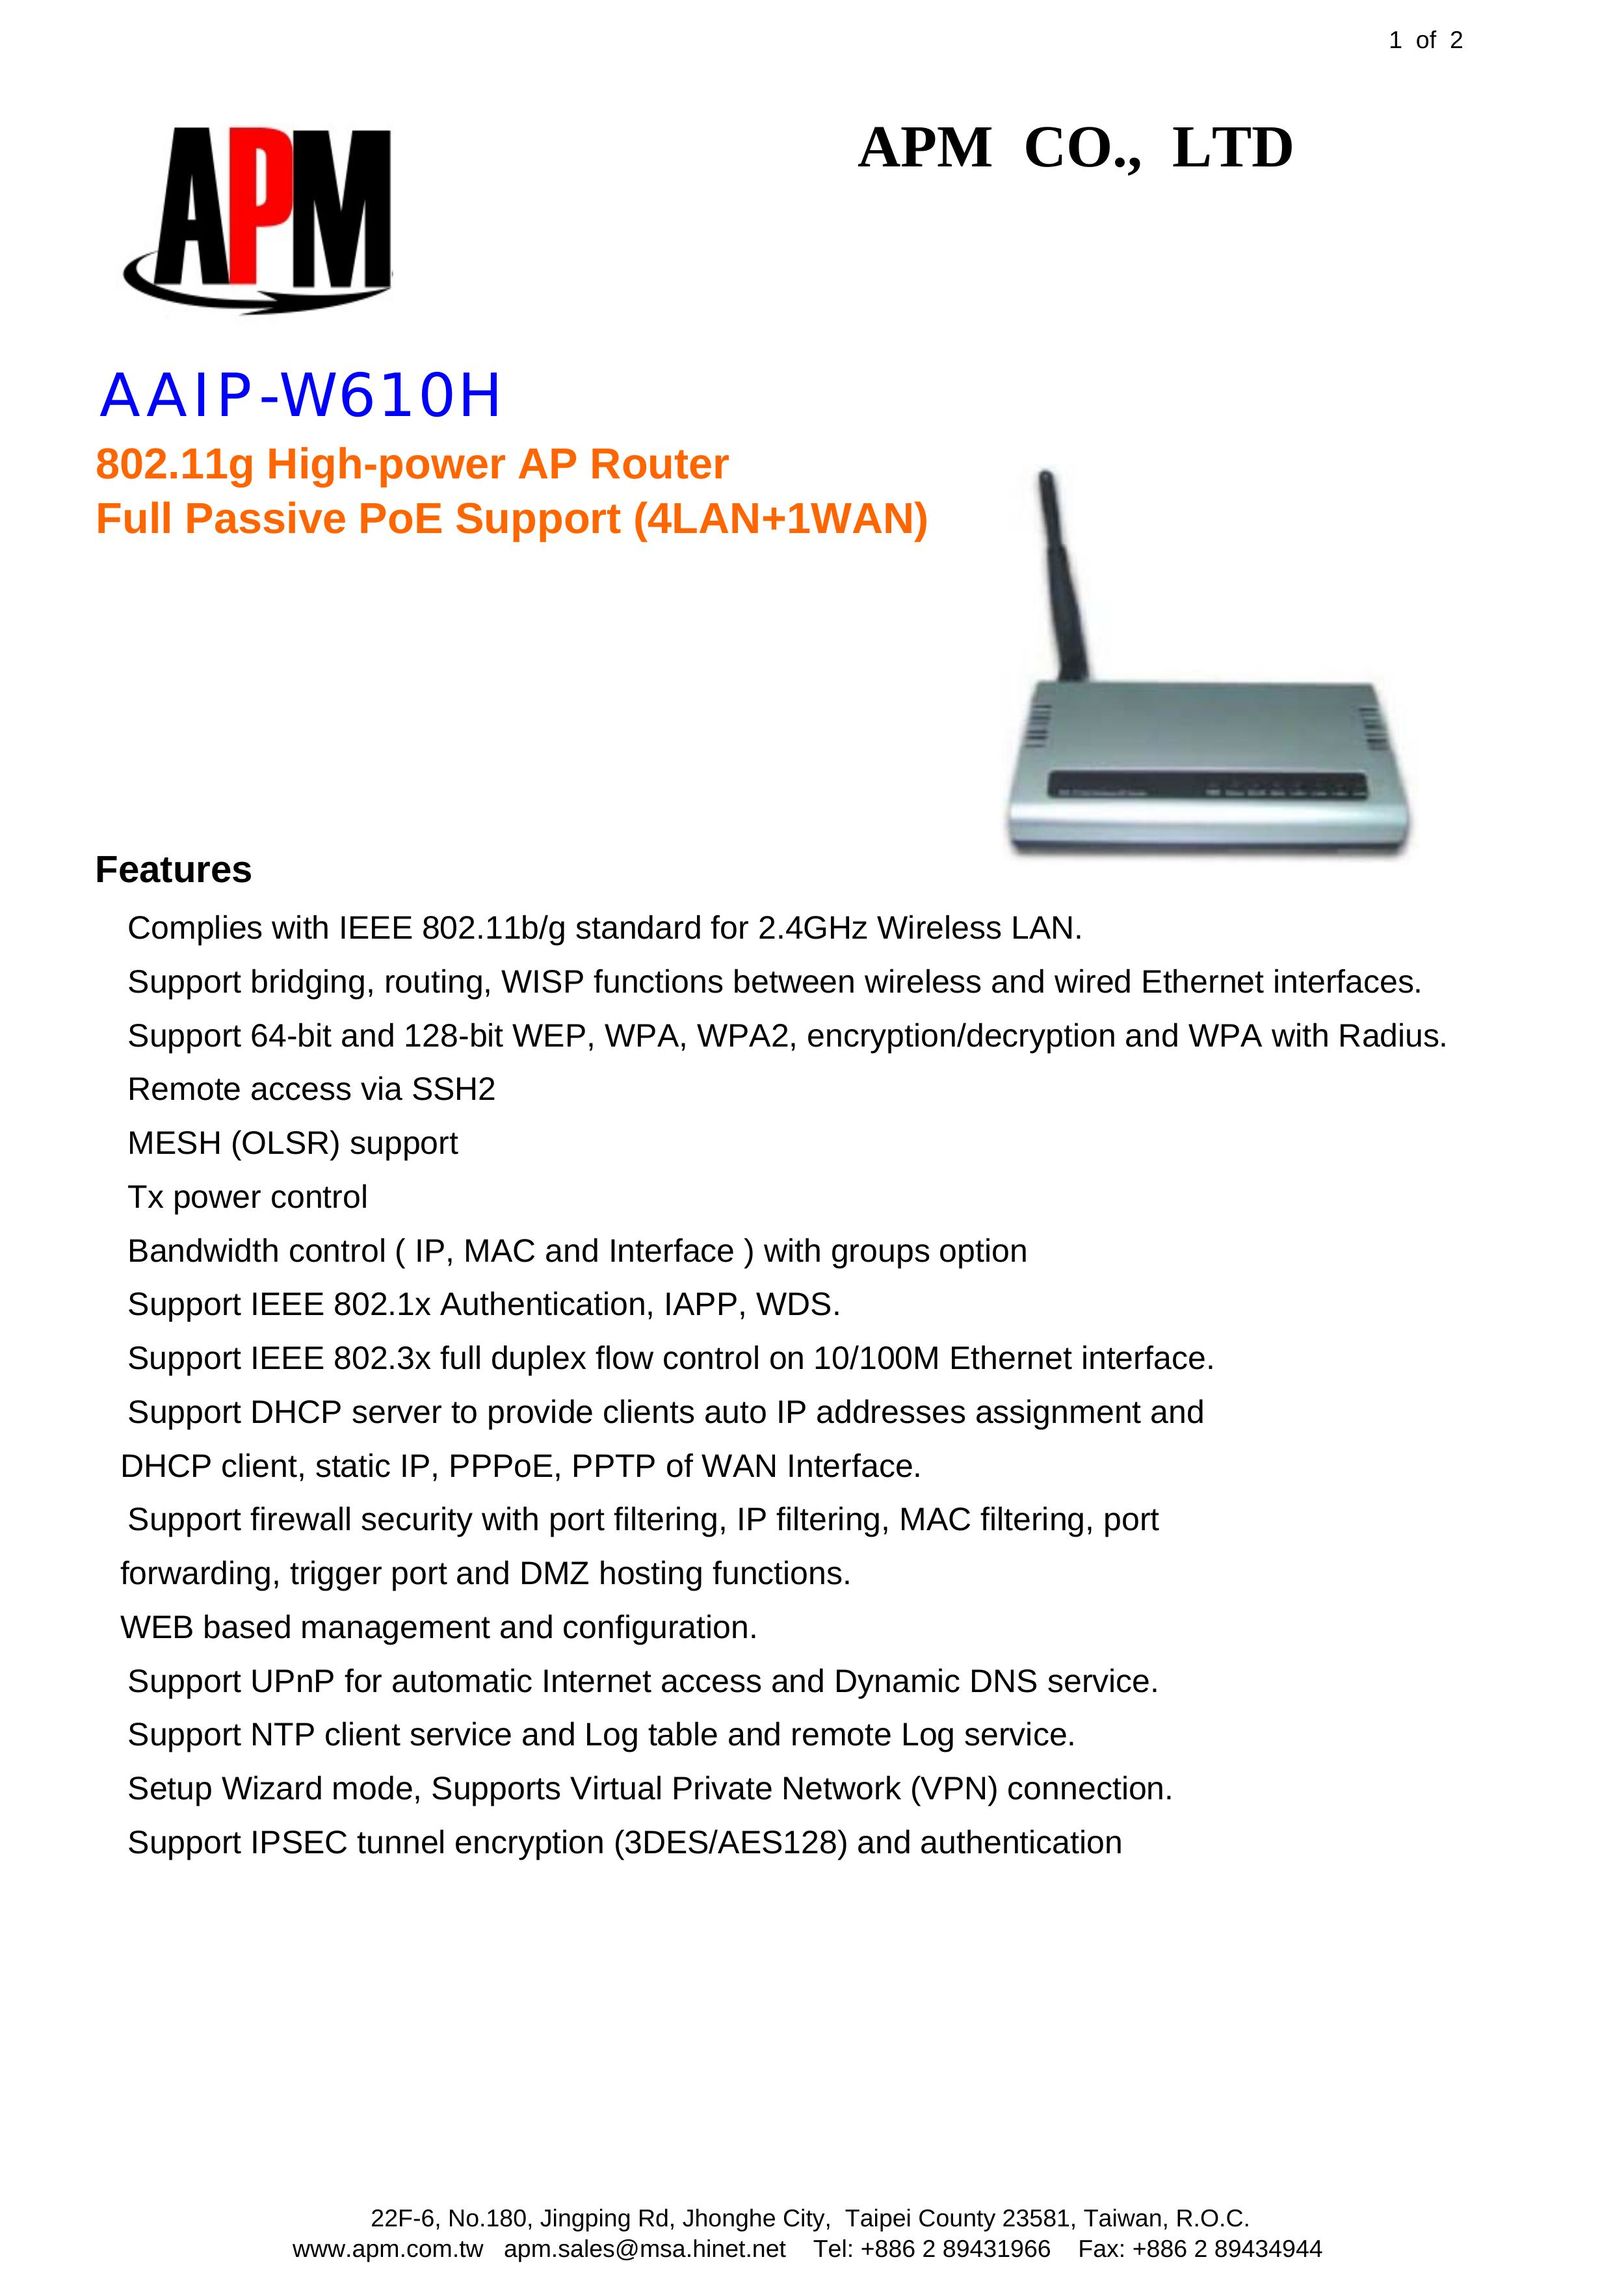 APM AAIP-W610H Network Router User Manual